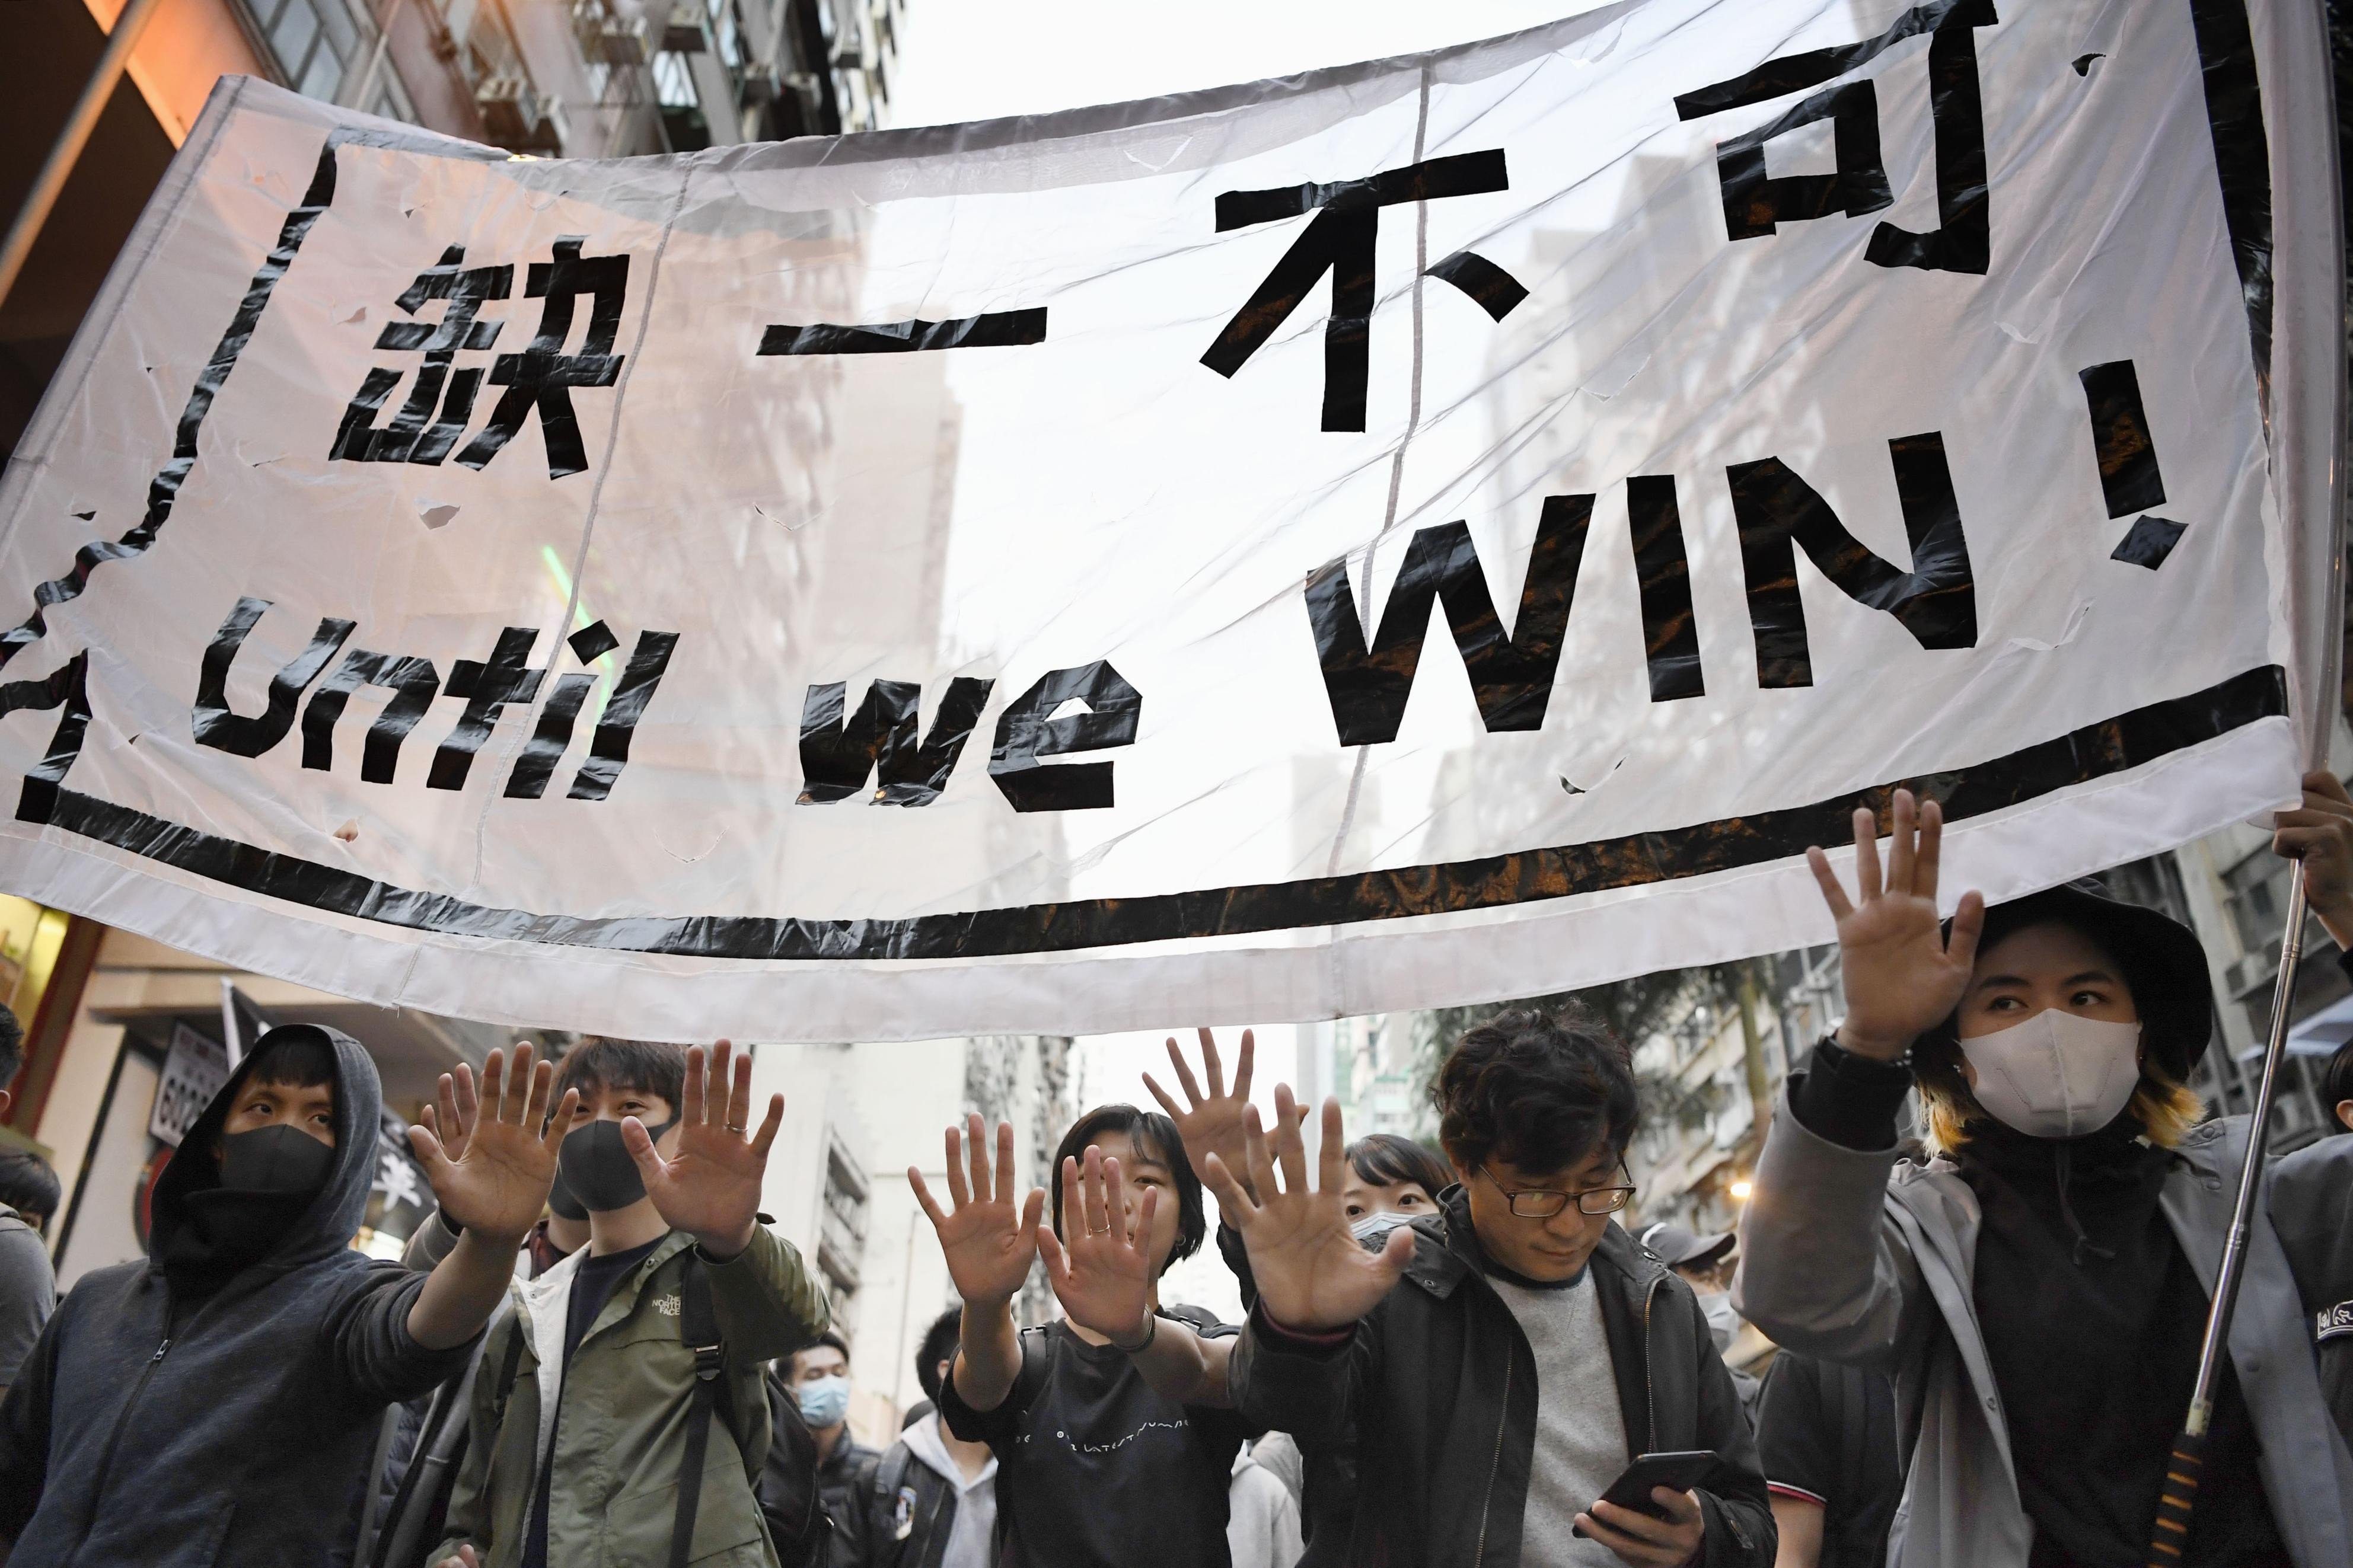 Protesters call for their five demands to be met during the anti-government rally in Hong Kong on December 8. Photo: Kyodo